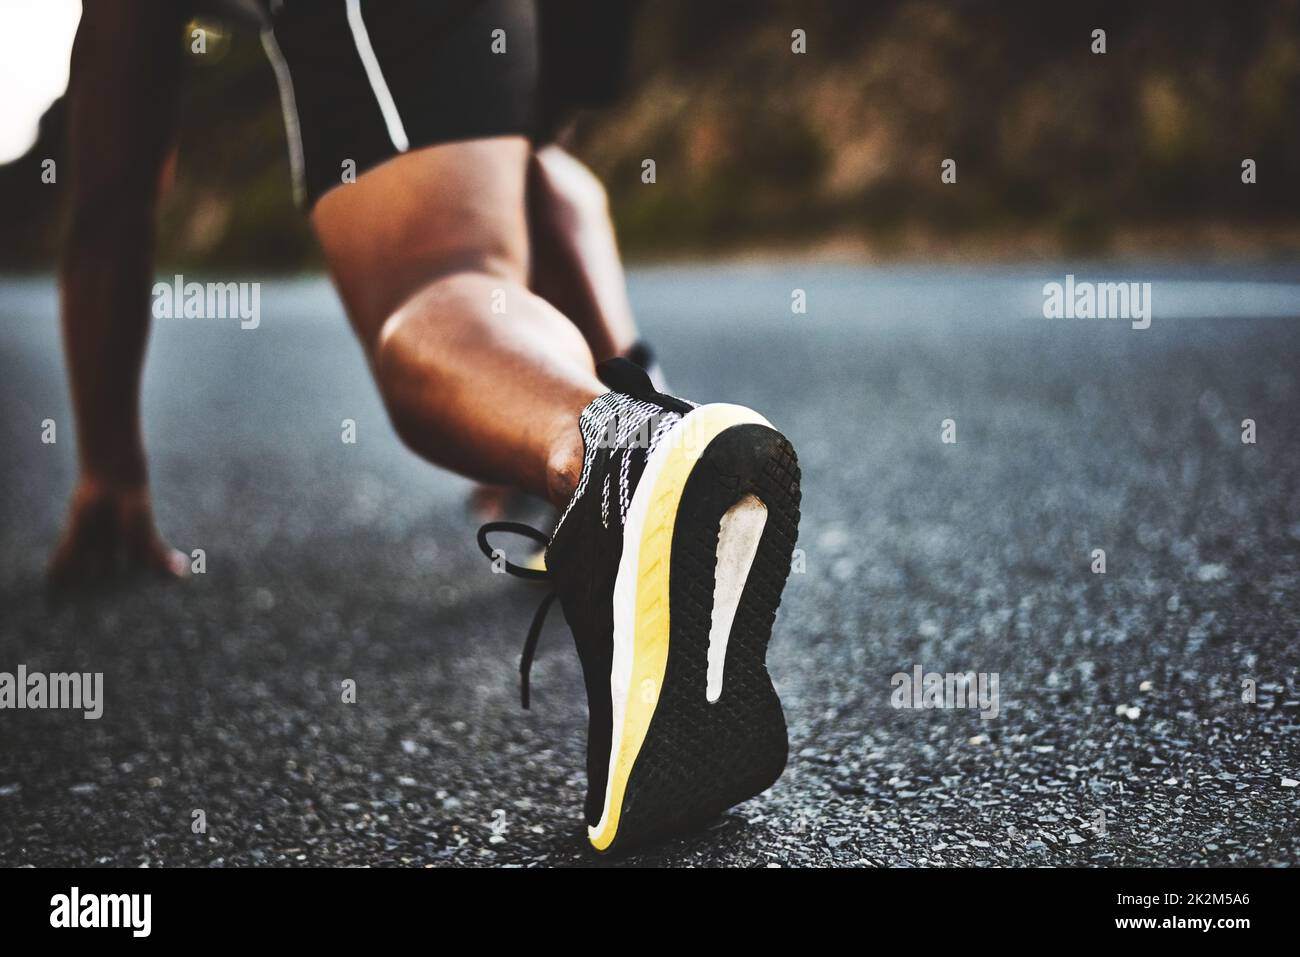 Nothing can stop me now. Low angle shot of a man out exercising on a tarmac road. Stock Photo